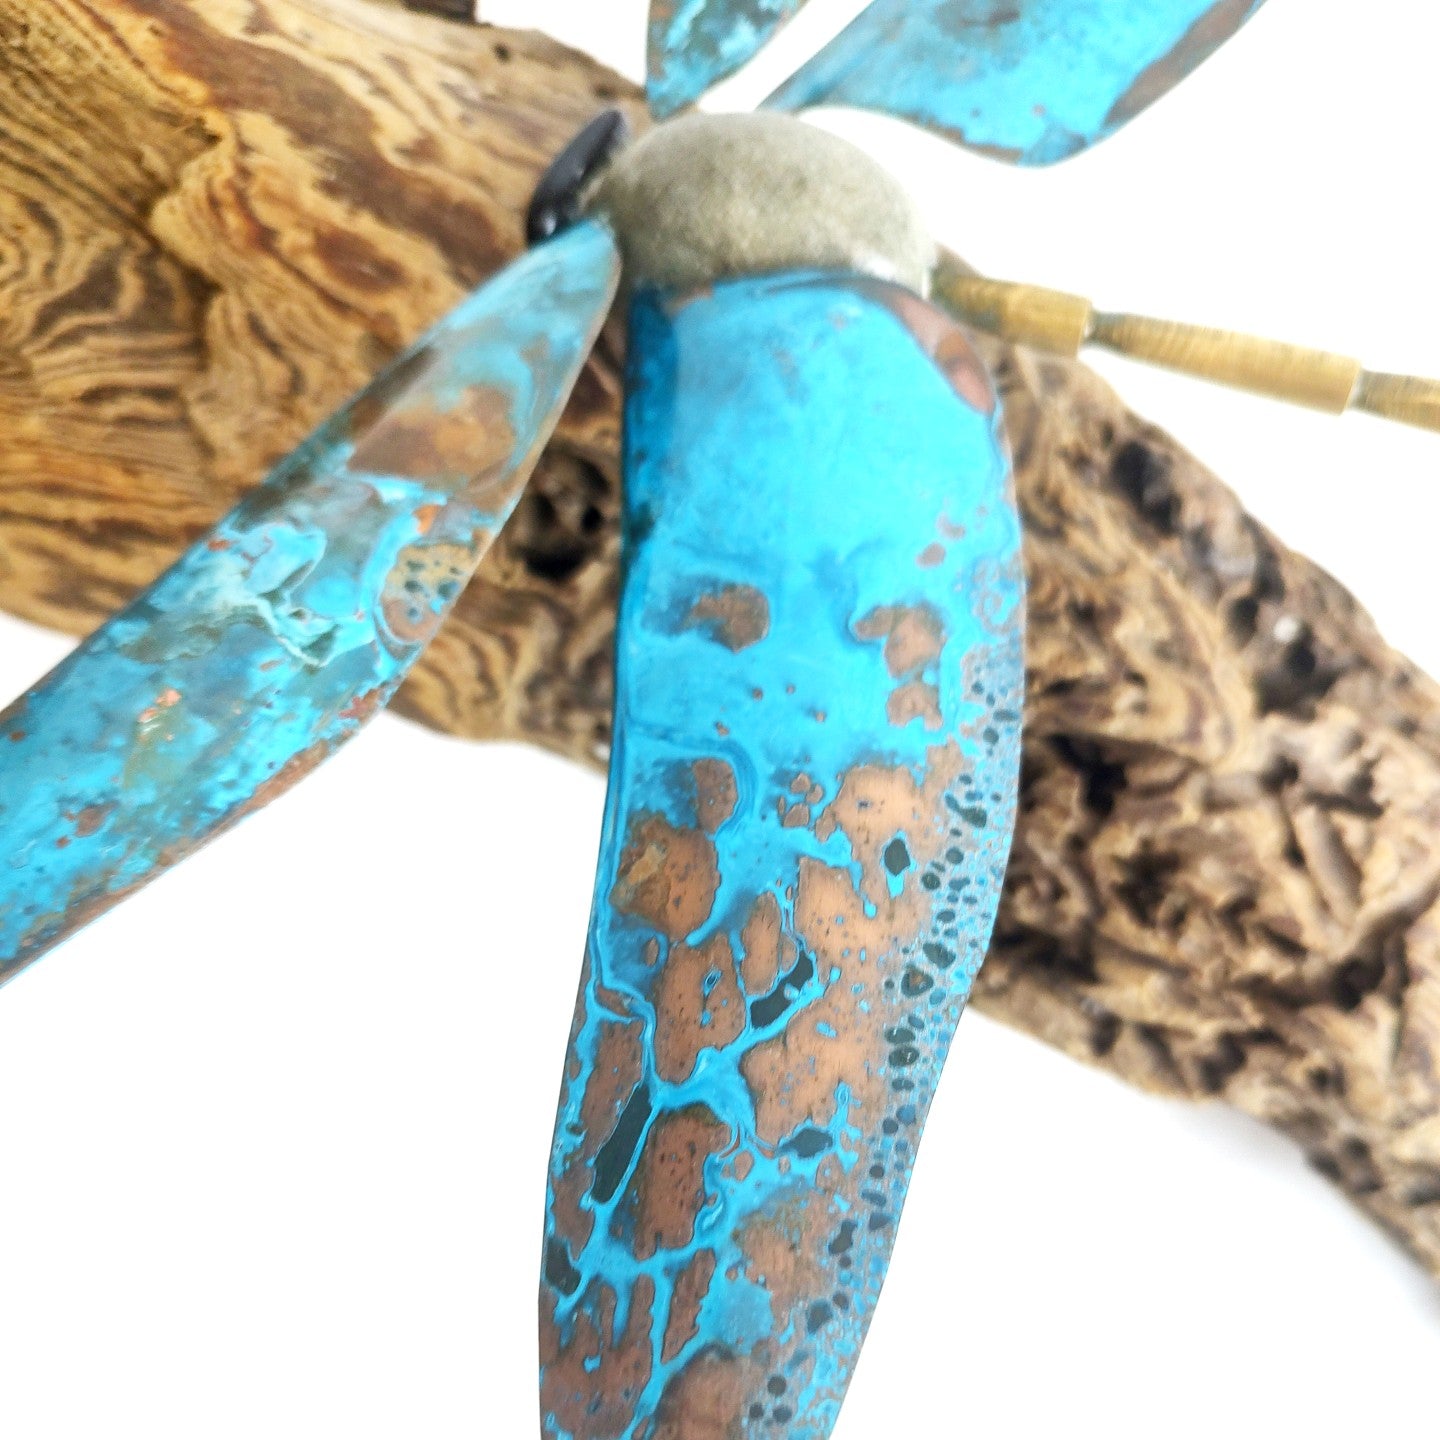 Dragonfly on Wood